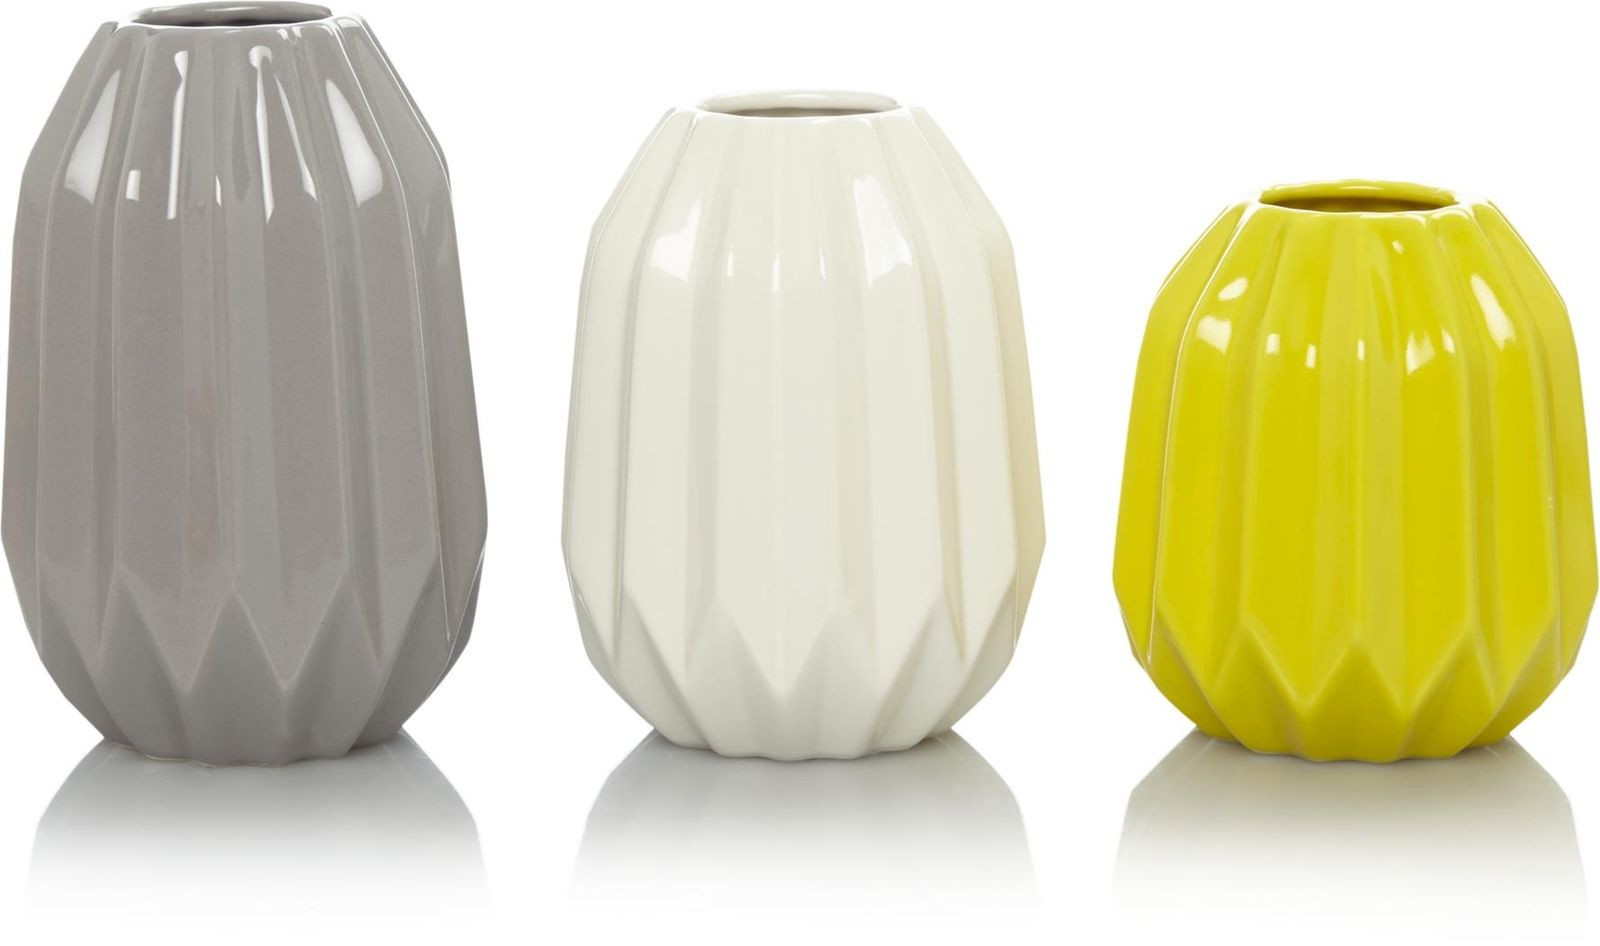 23 attractive Eastland Glass Cylinder Vases Set Of 4 2024 free download eastland glass cylinder vases set of 4 of small vases set of 3 grey white yellow quirky vase home decor intended for norton secured powered by verisign